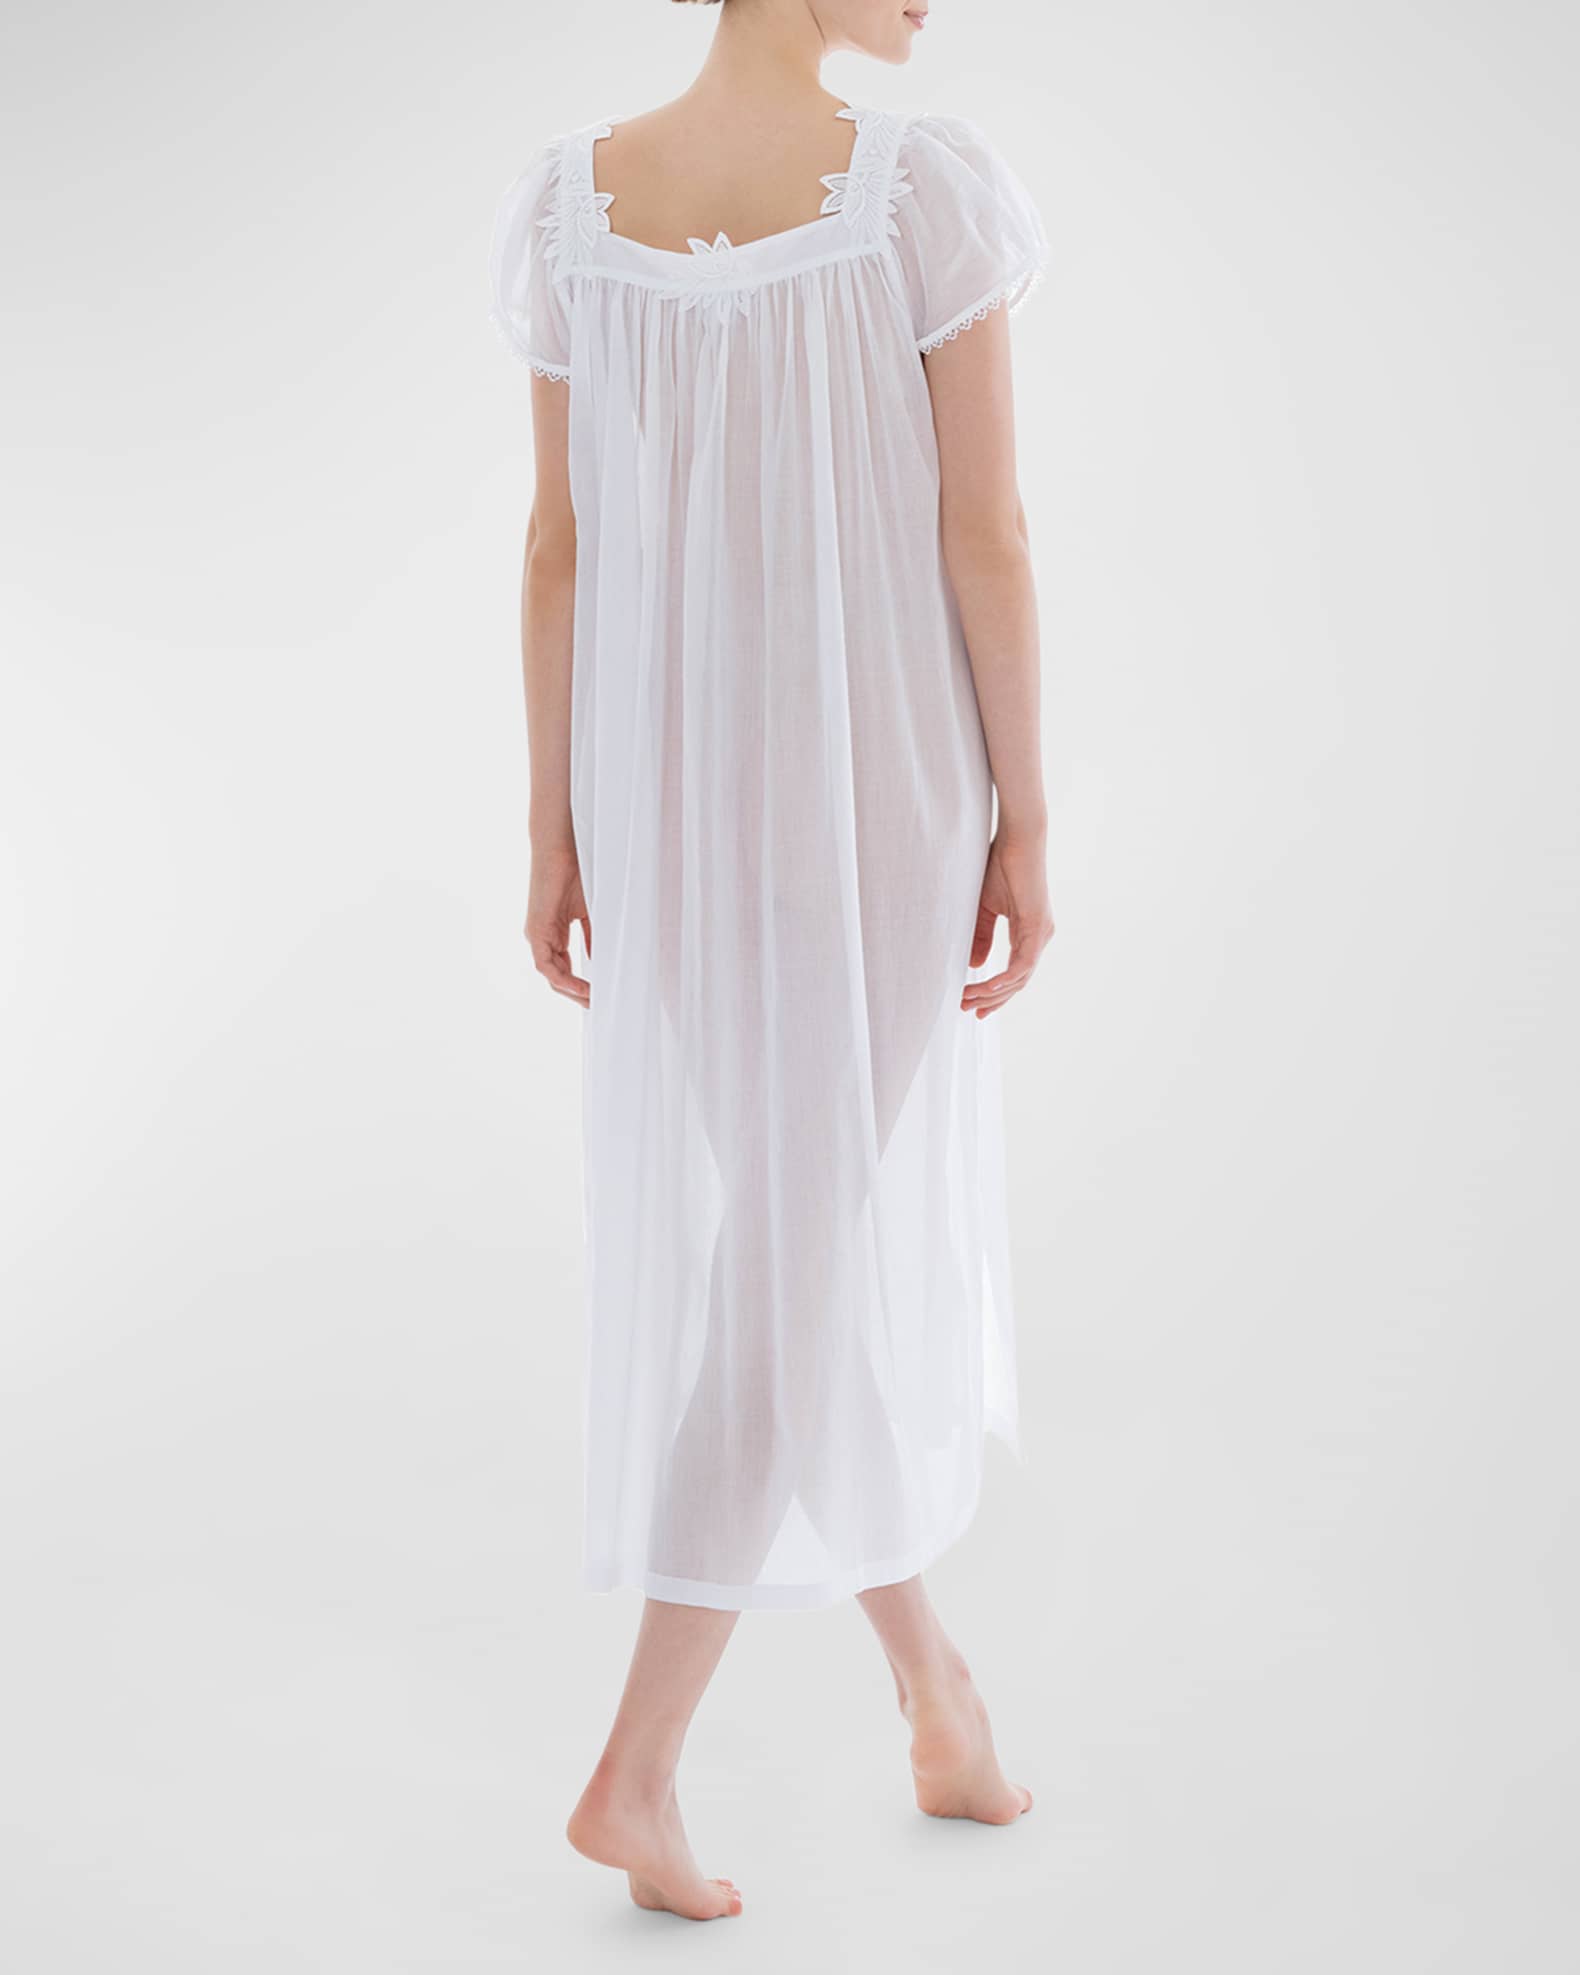 Celestine Florence 2 Ruched Lace-Trim Cotton Nightgown | Neiman Marcus